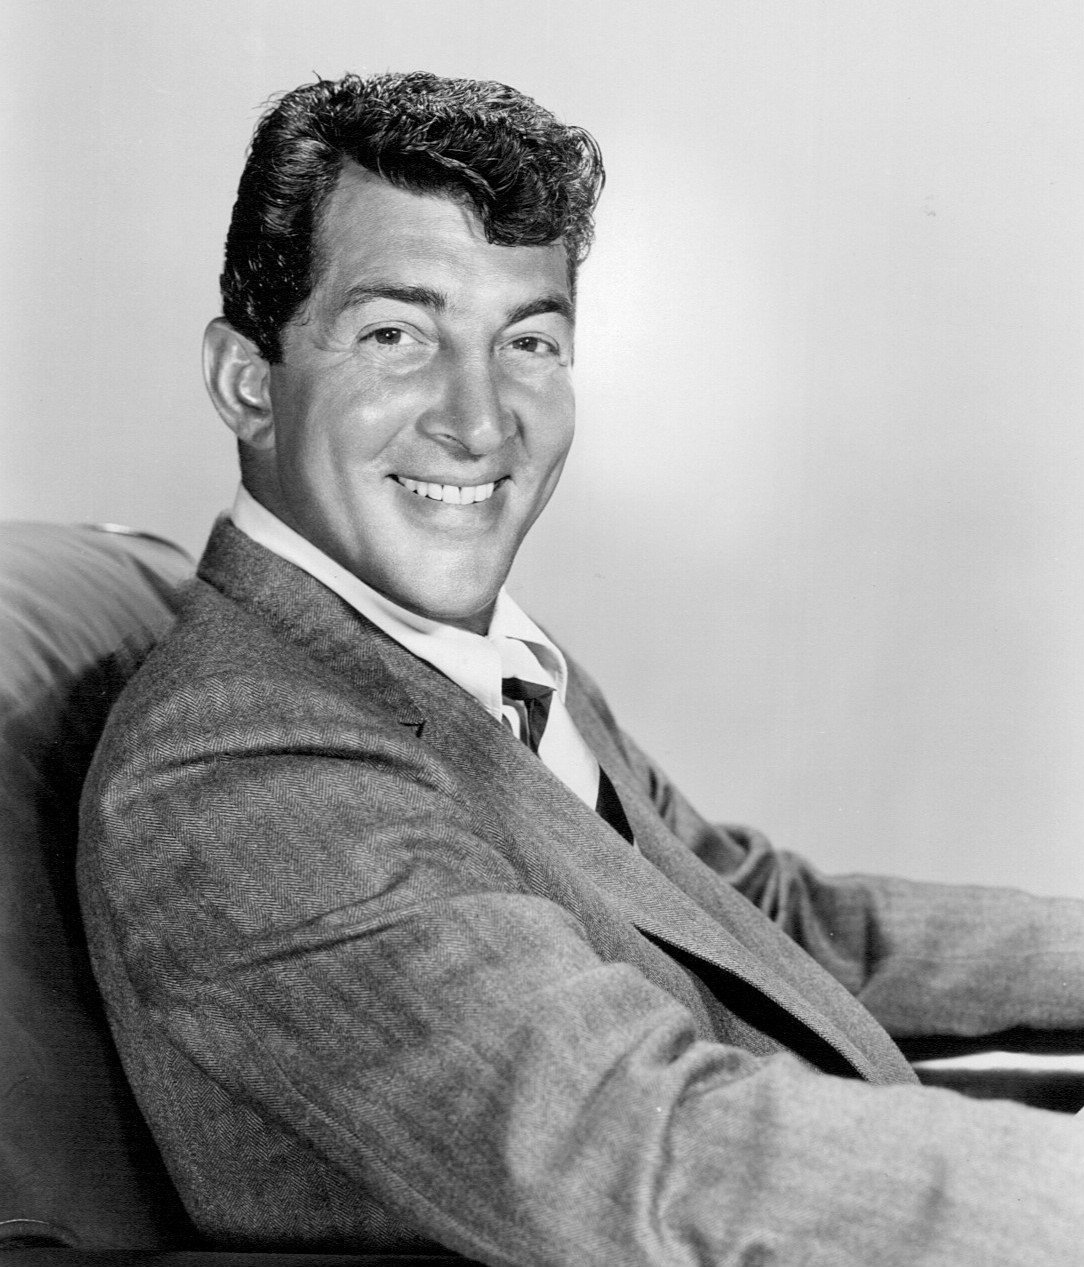 Photo of Dean Martin from 1959. Photo: Wikimedia Commons